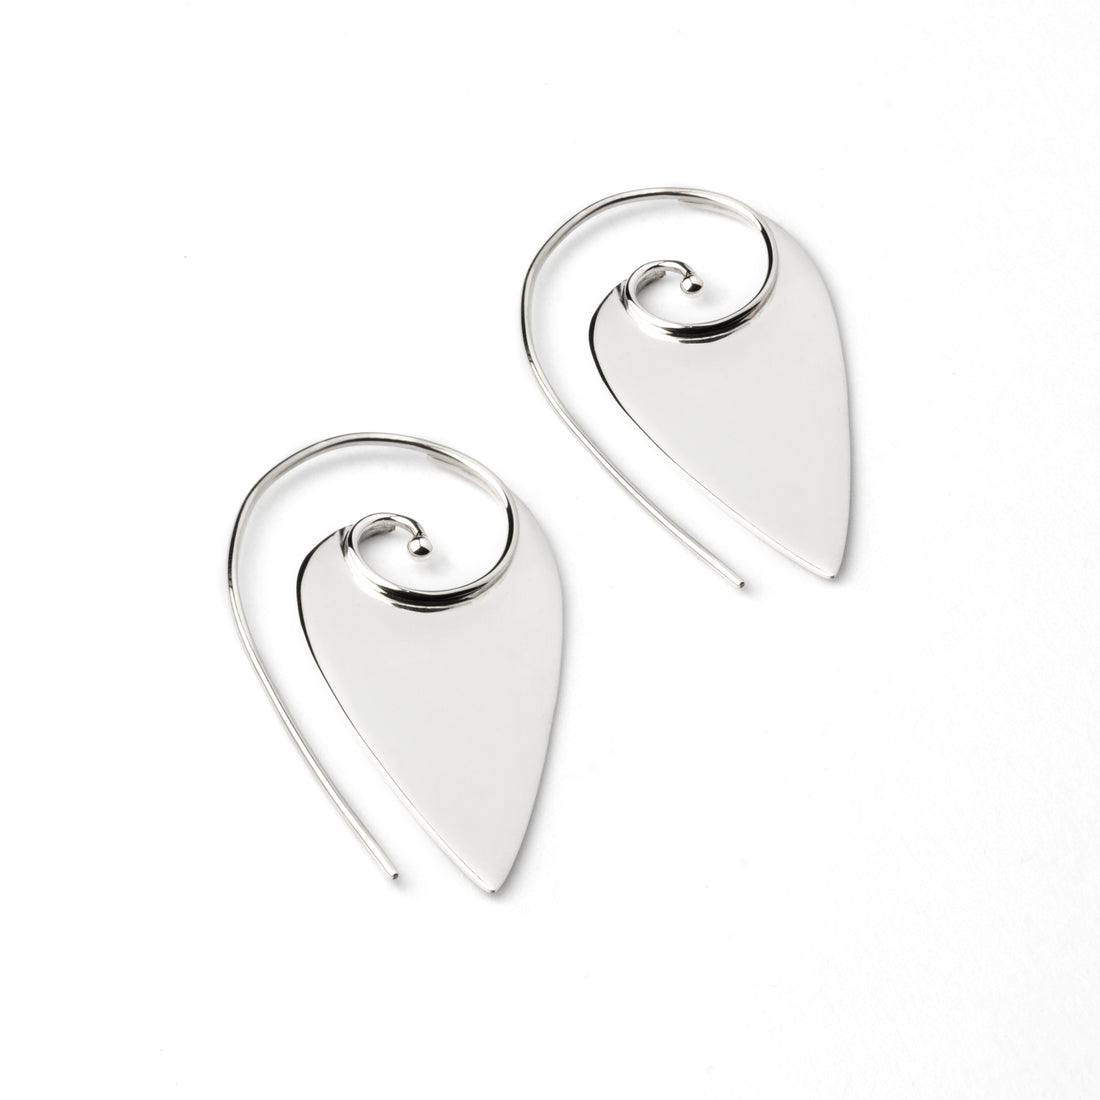 Silver Pointed Spiral Earrings